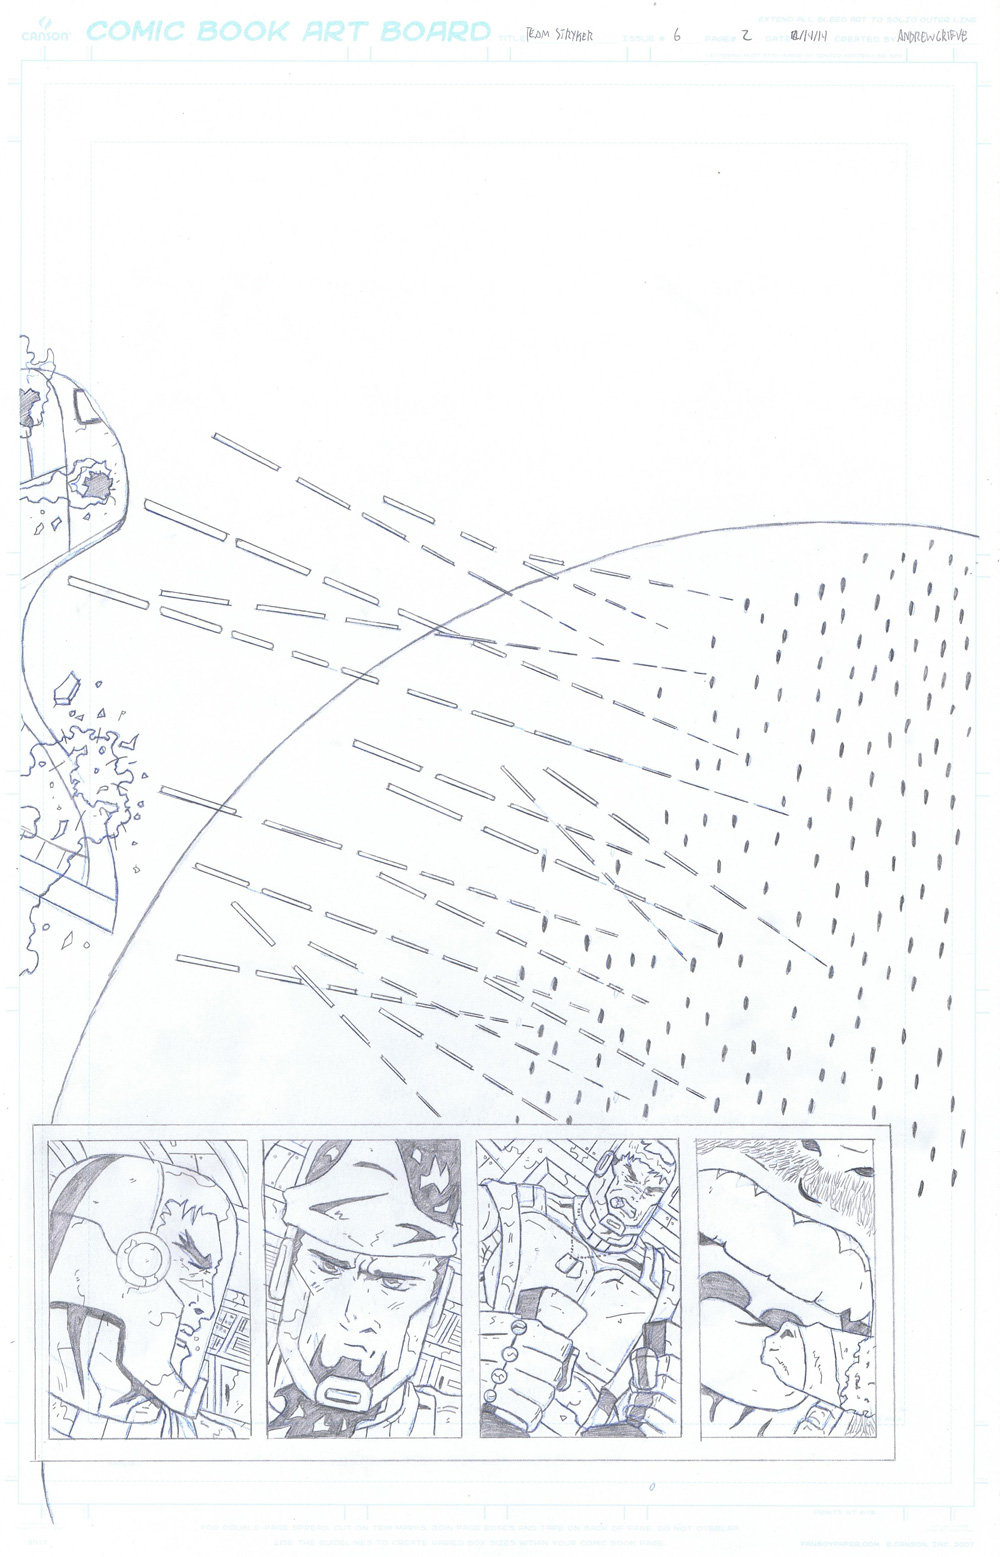 MISSION 006: PAGE 02 PENCIL